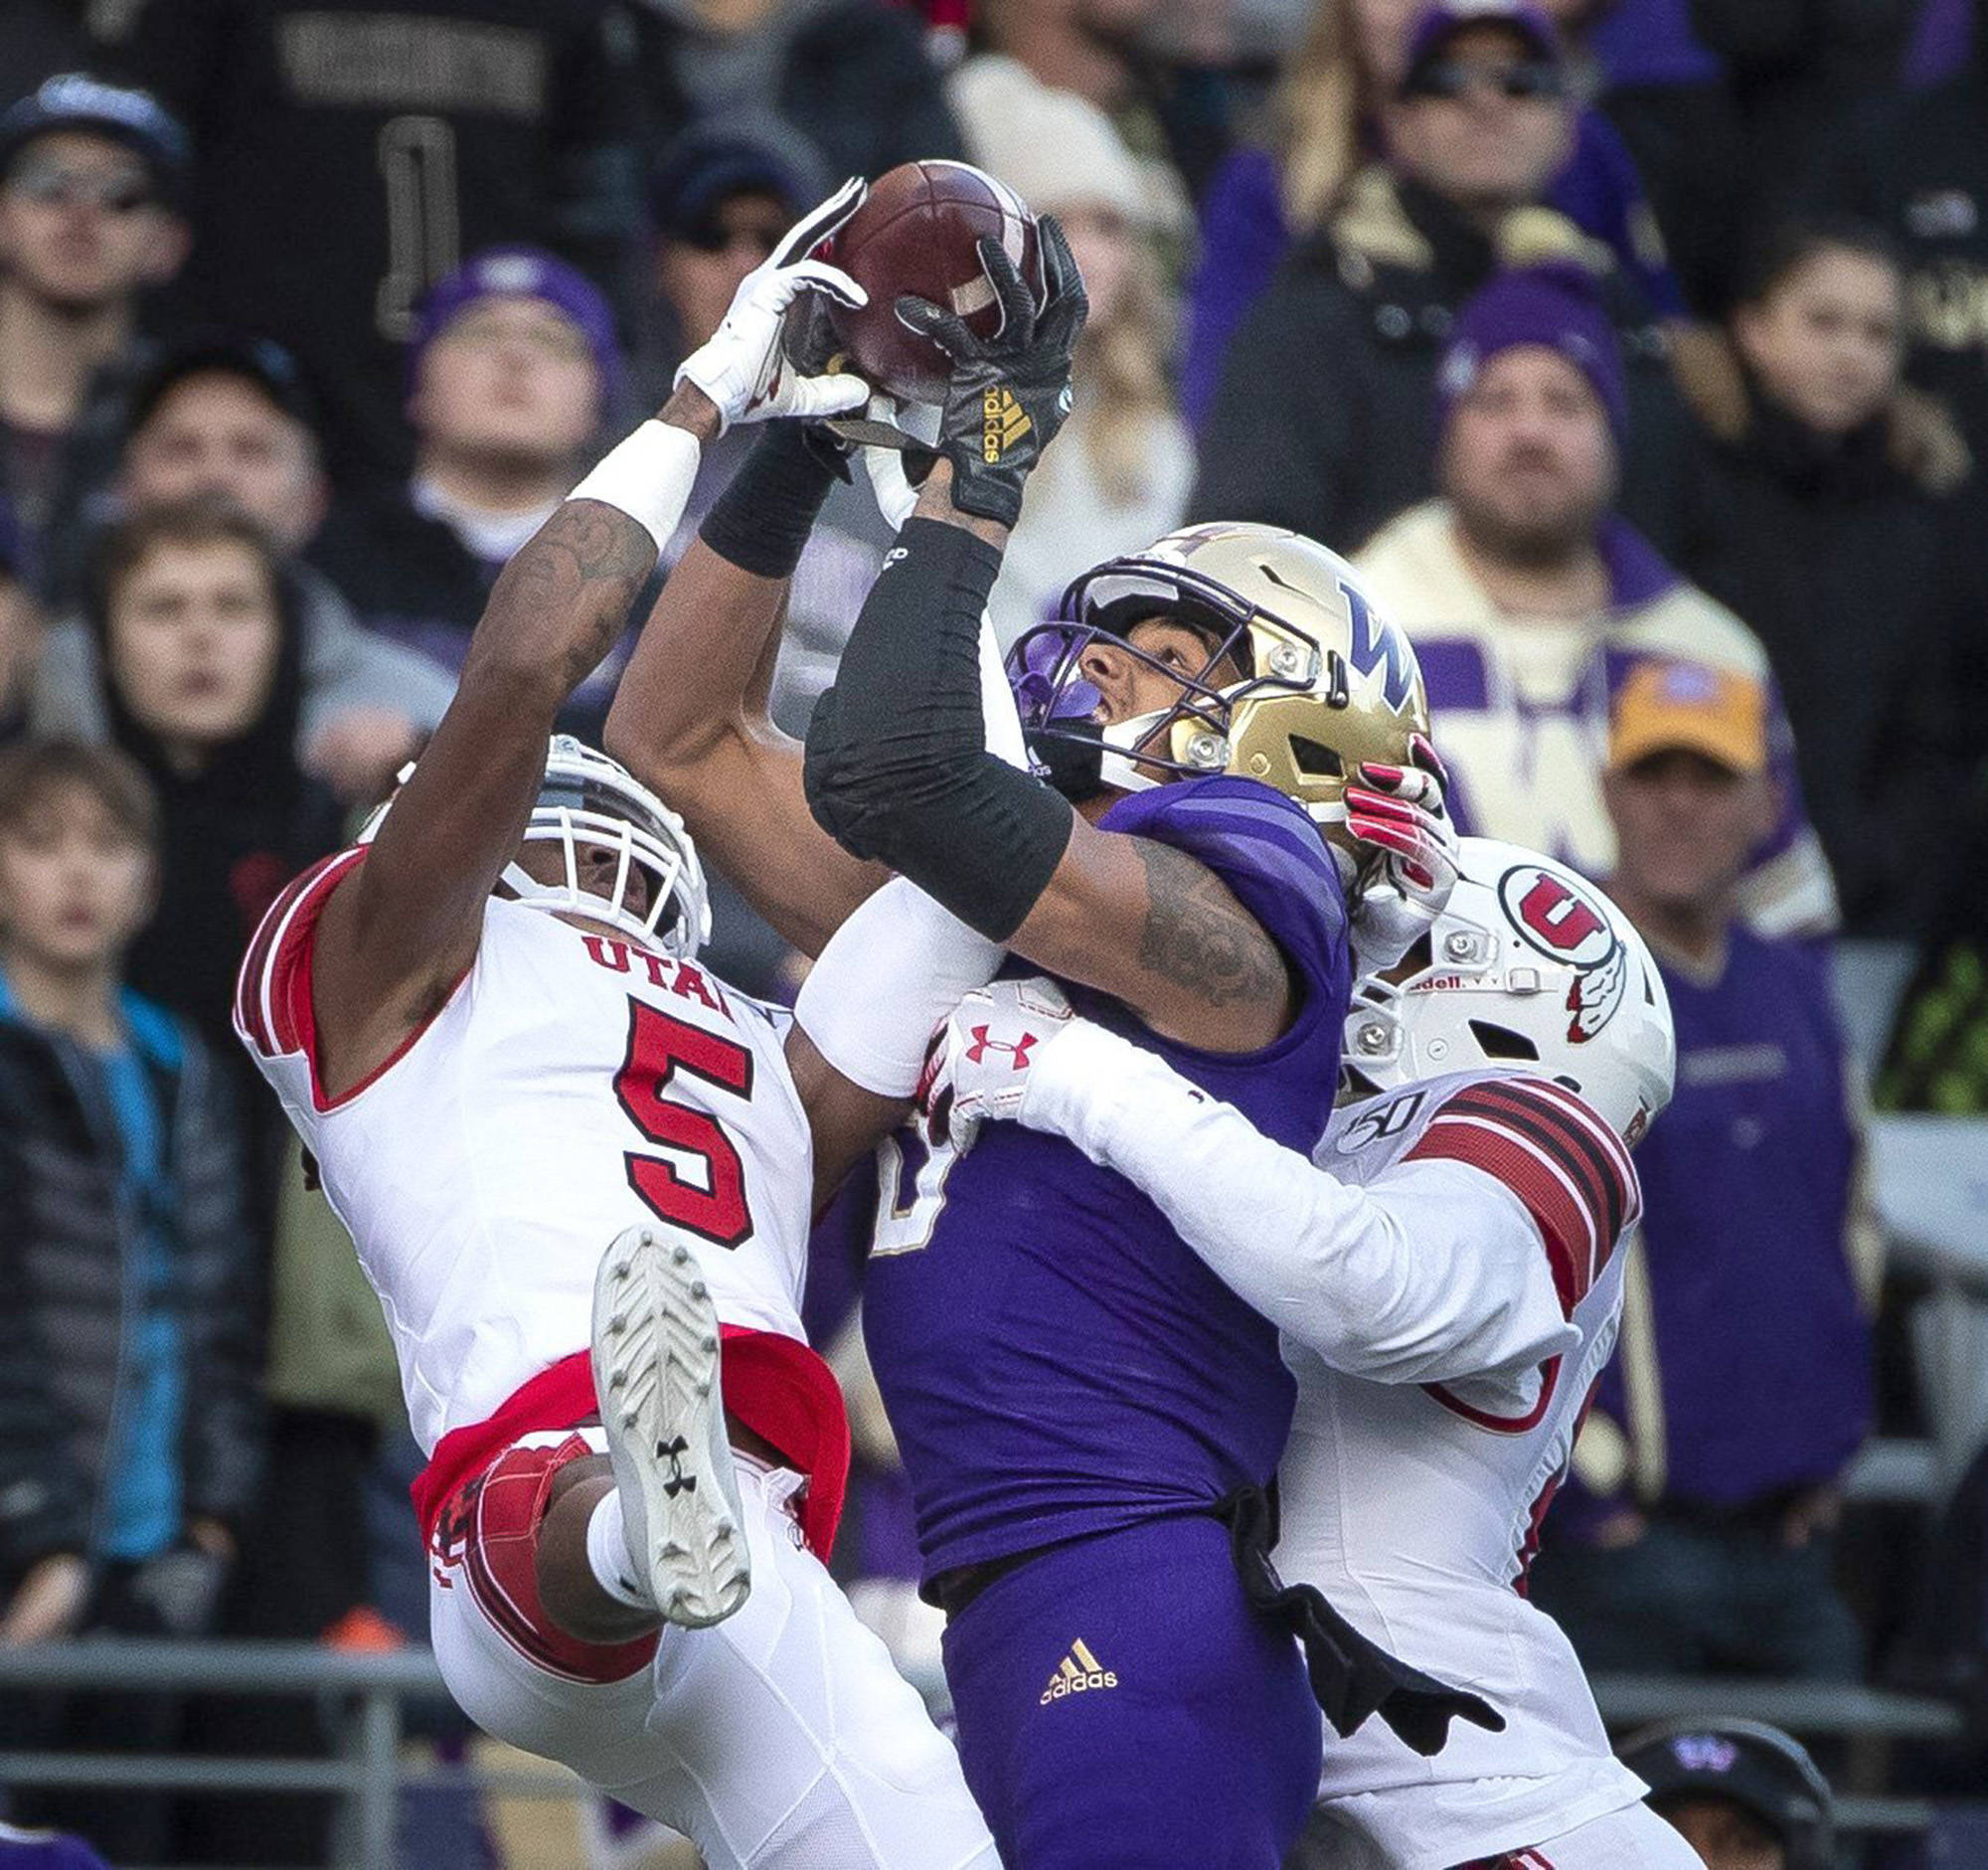 Dean Rutz | Seattle Times                                Washington wide receiver Marquis Spiker, middle, can’t pull in a long pass while defended by Utah’s Tareke Lewis (5) at Husky Stadium in Seattle on Saturday, Nov. 2.